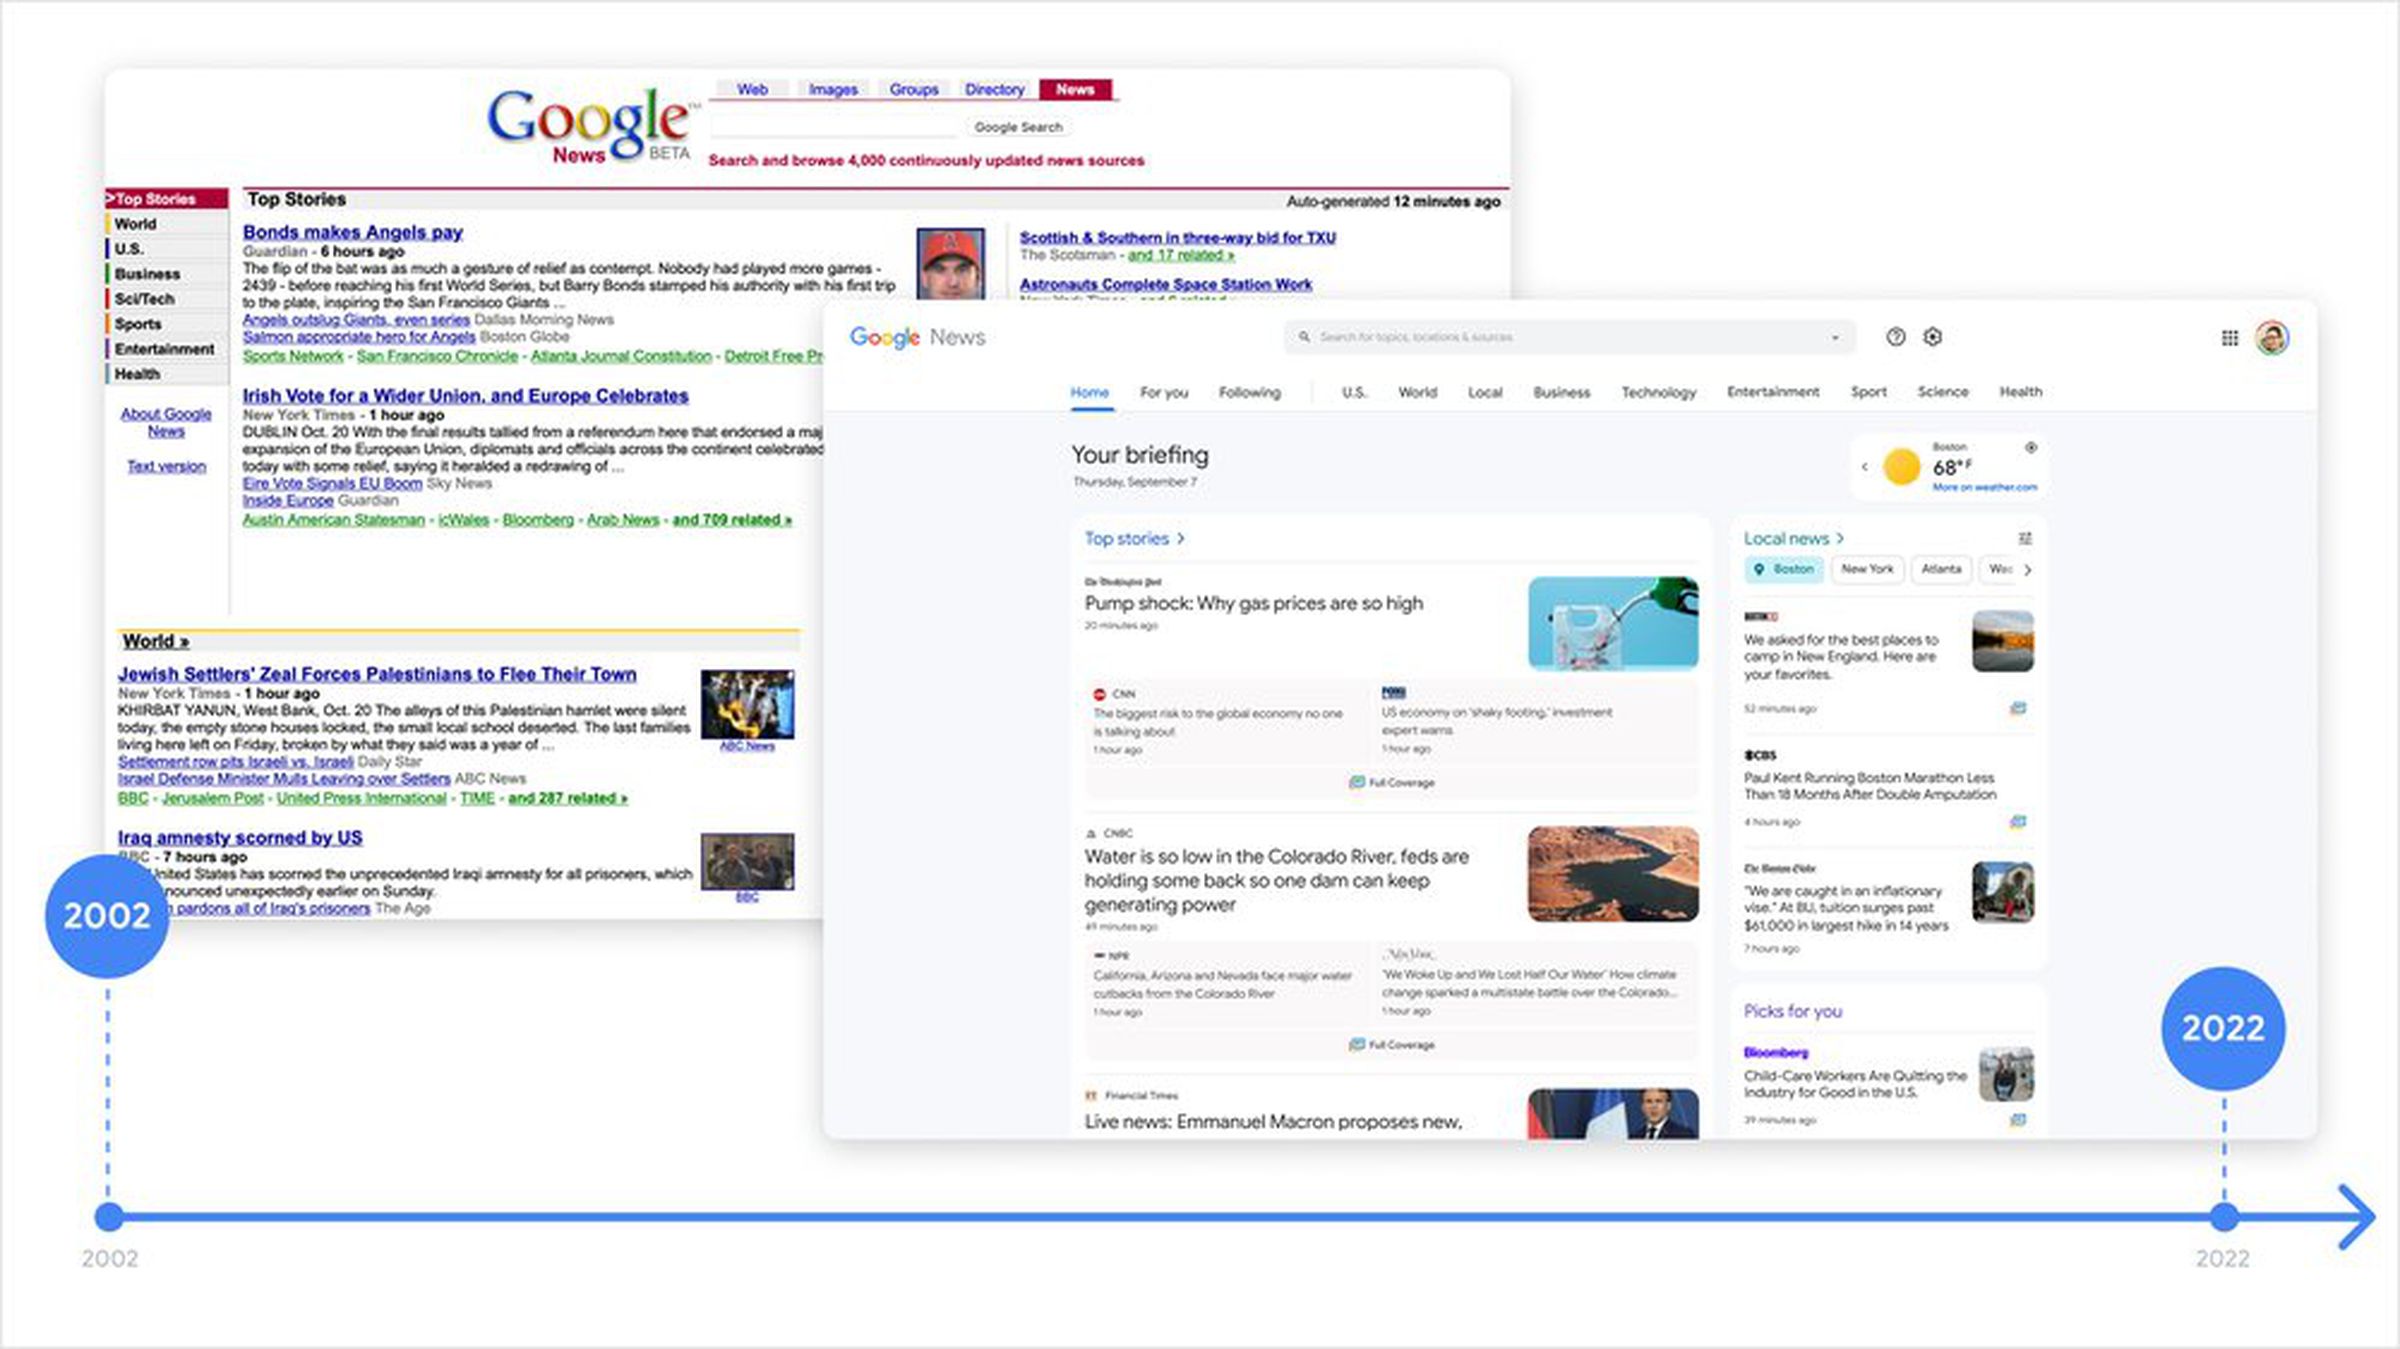 Google News has now been running for 20 years, after launching in 2002. 